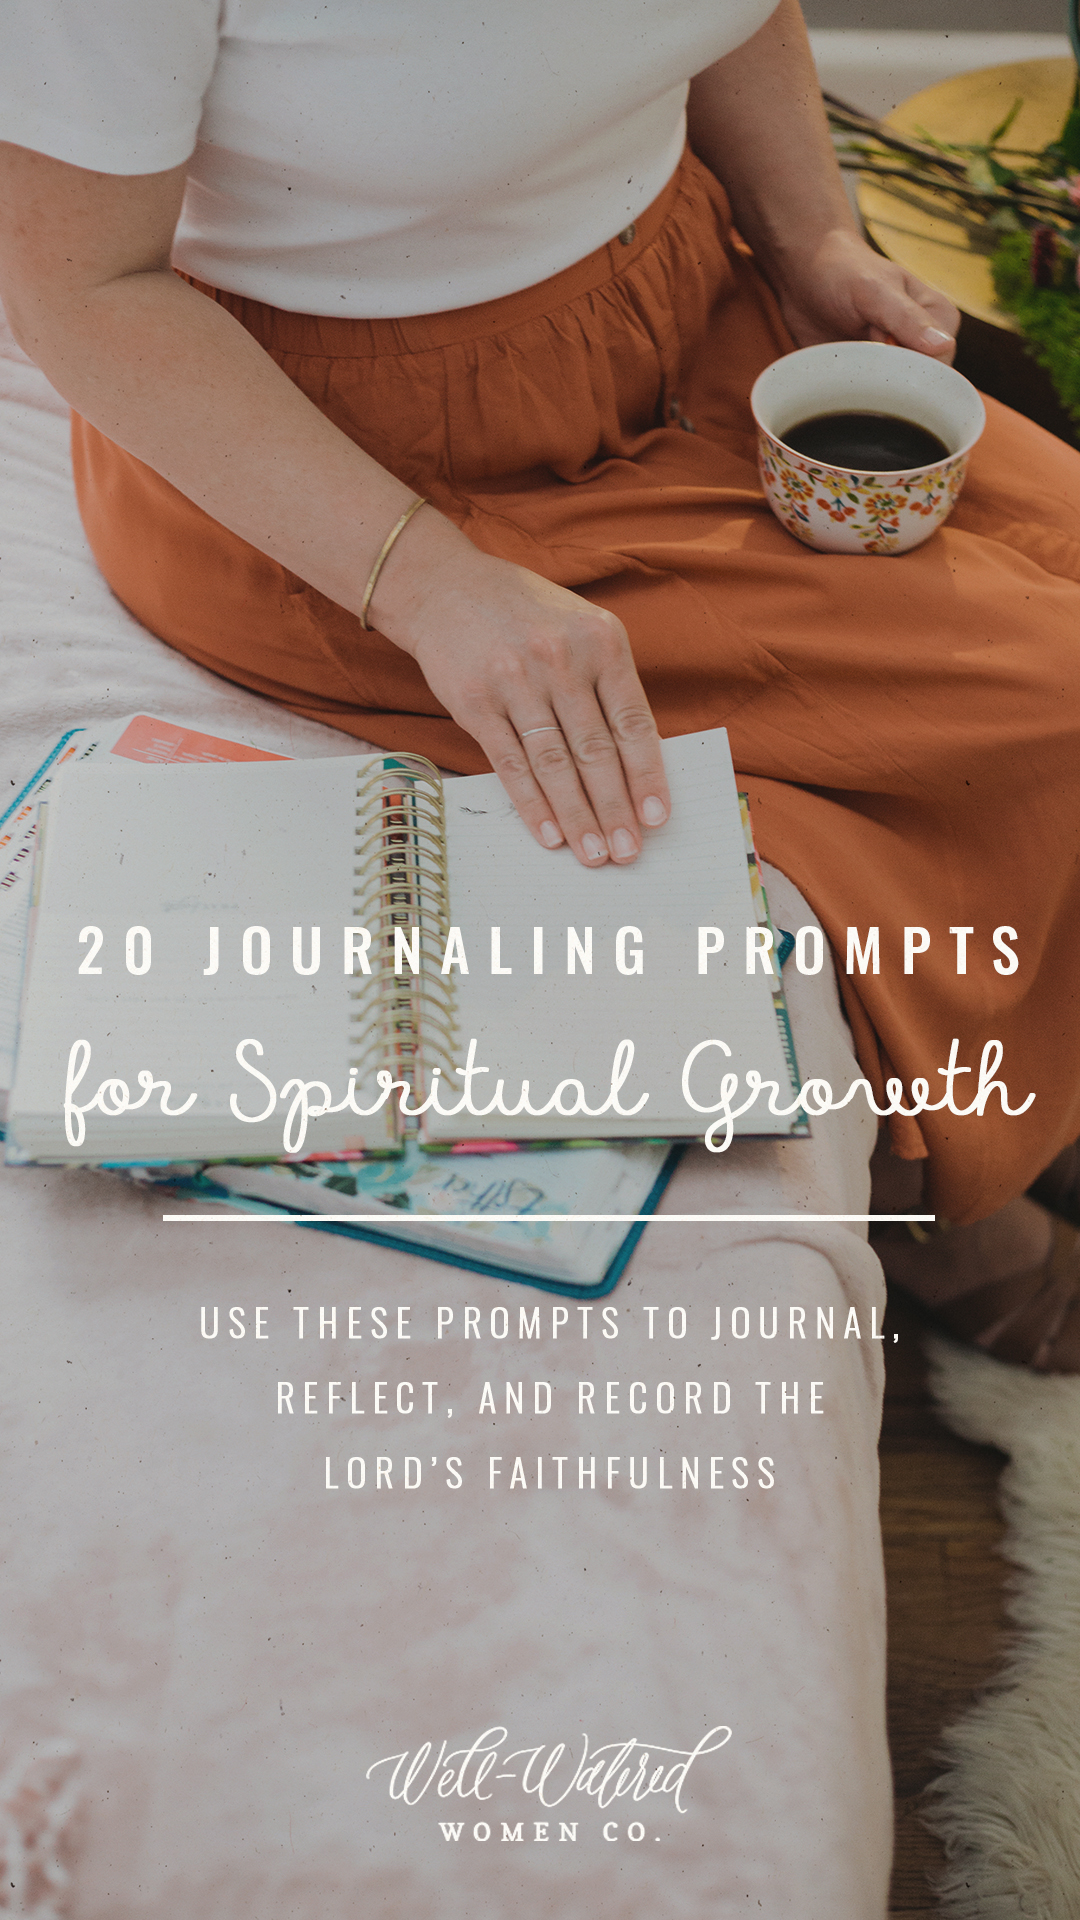 Well Watered Women Blog | 20 Journaling Prompts for Encouraging Spiritual Growth